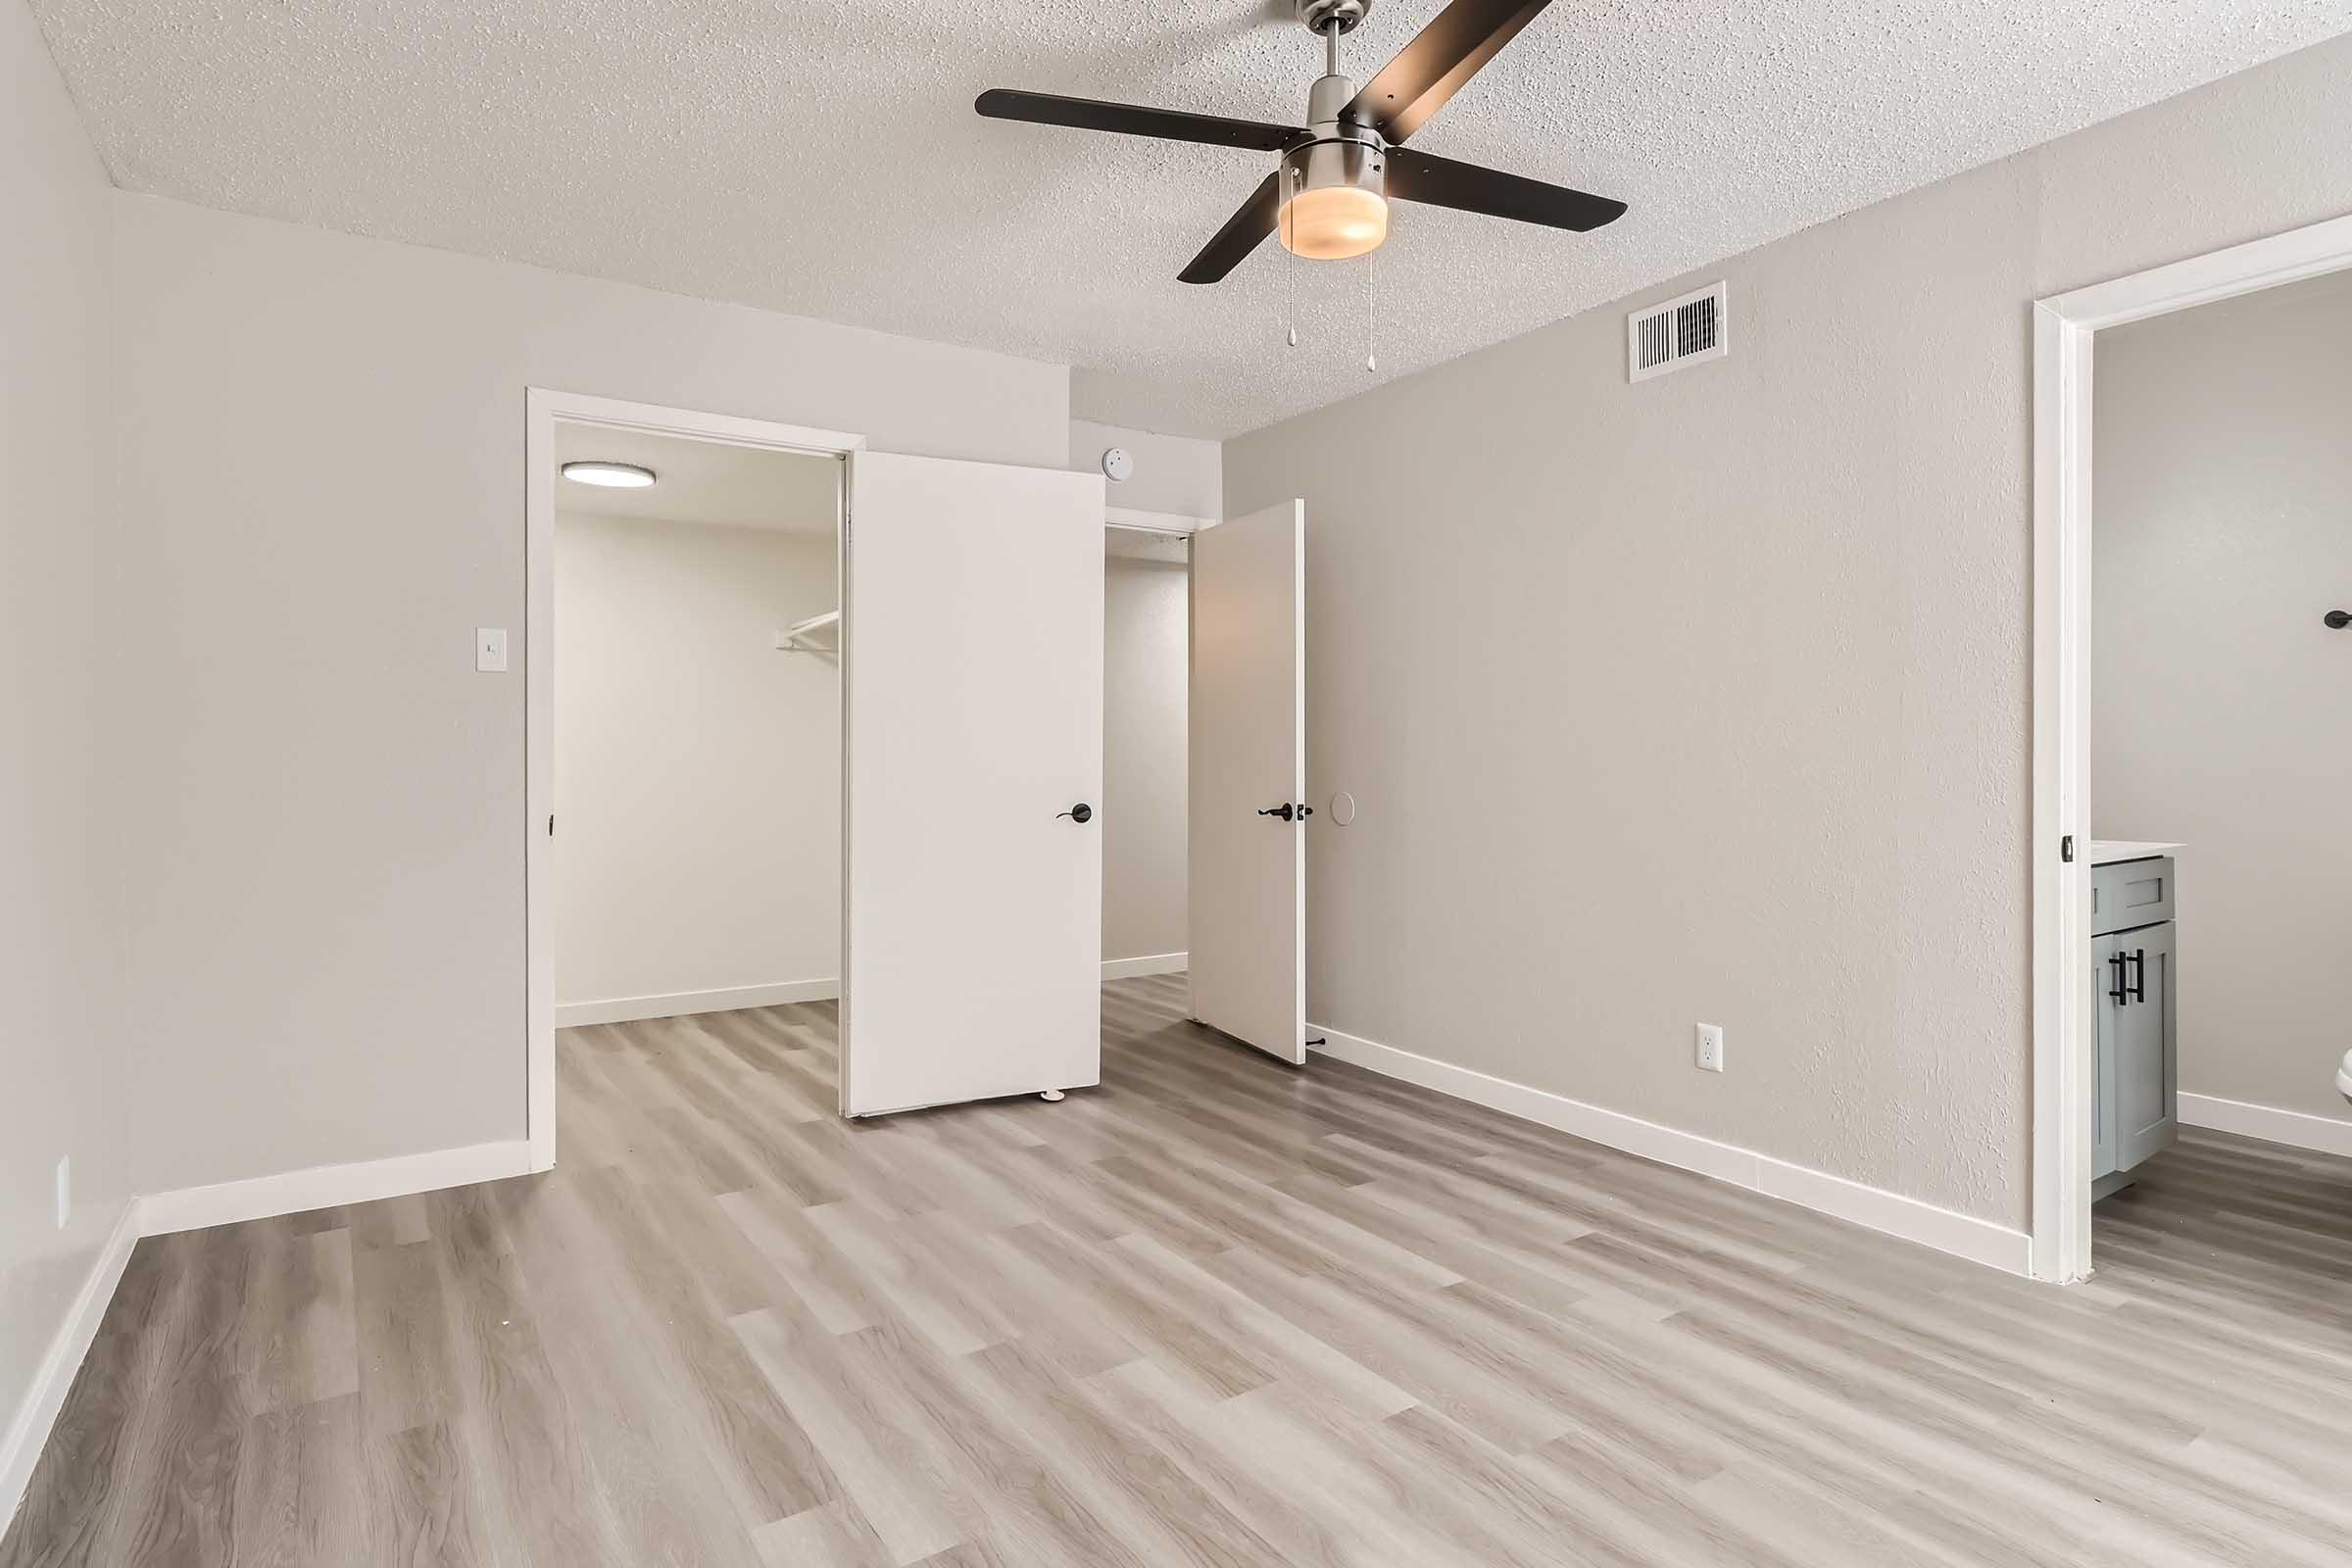 A bedroom with wood-style flooring and an en-suite bathroom at Rise North Arlington.